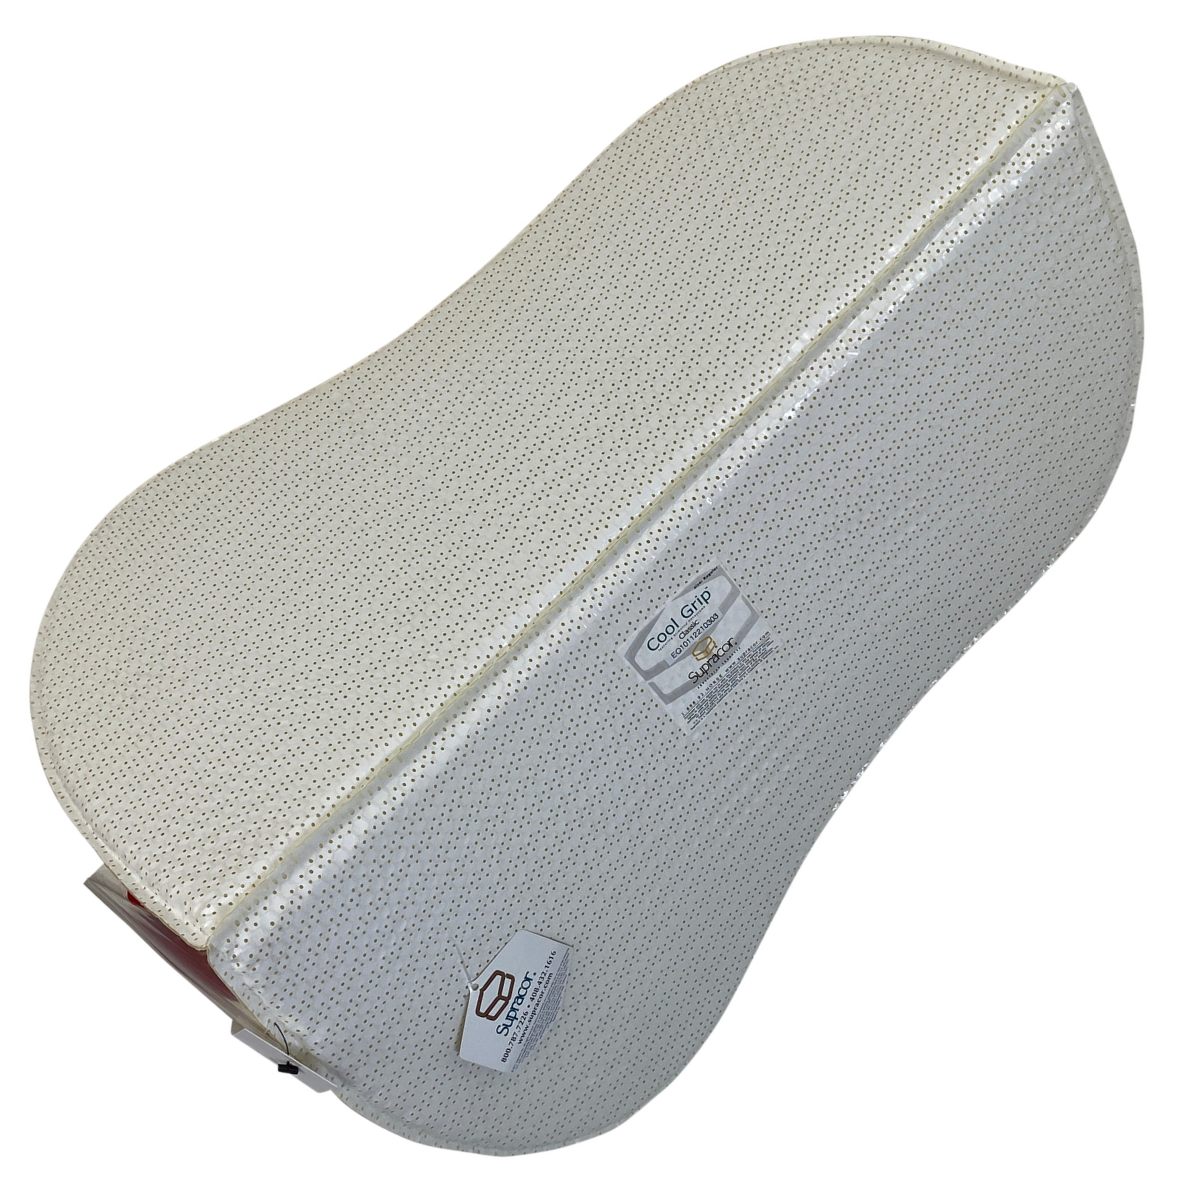 Supracor Cool Grip Classic Half Pad in White